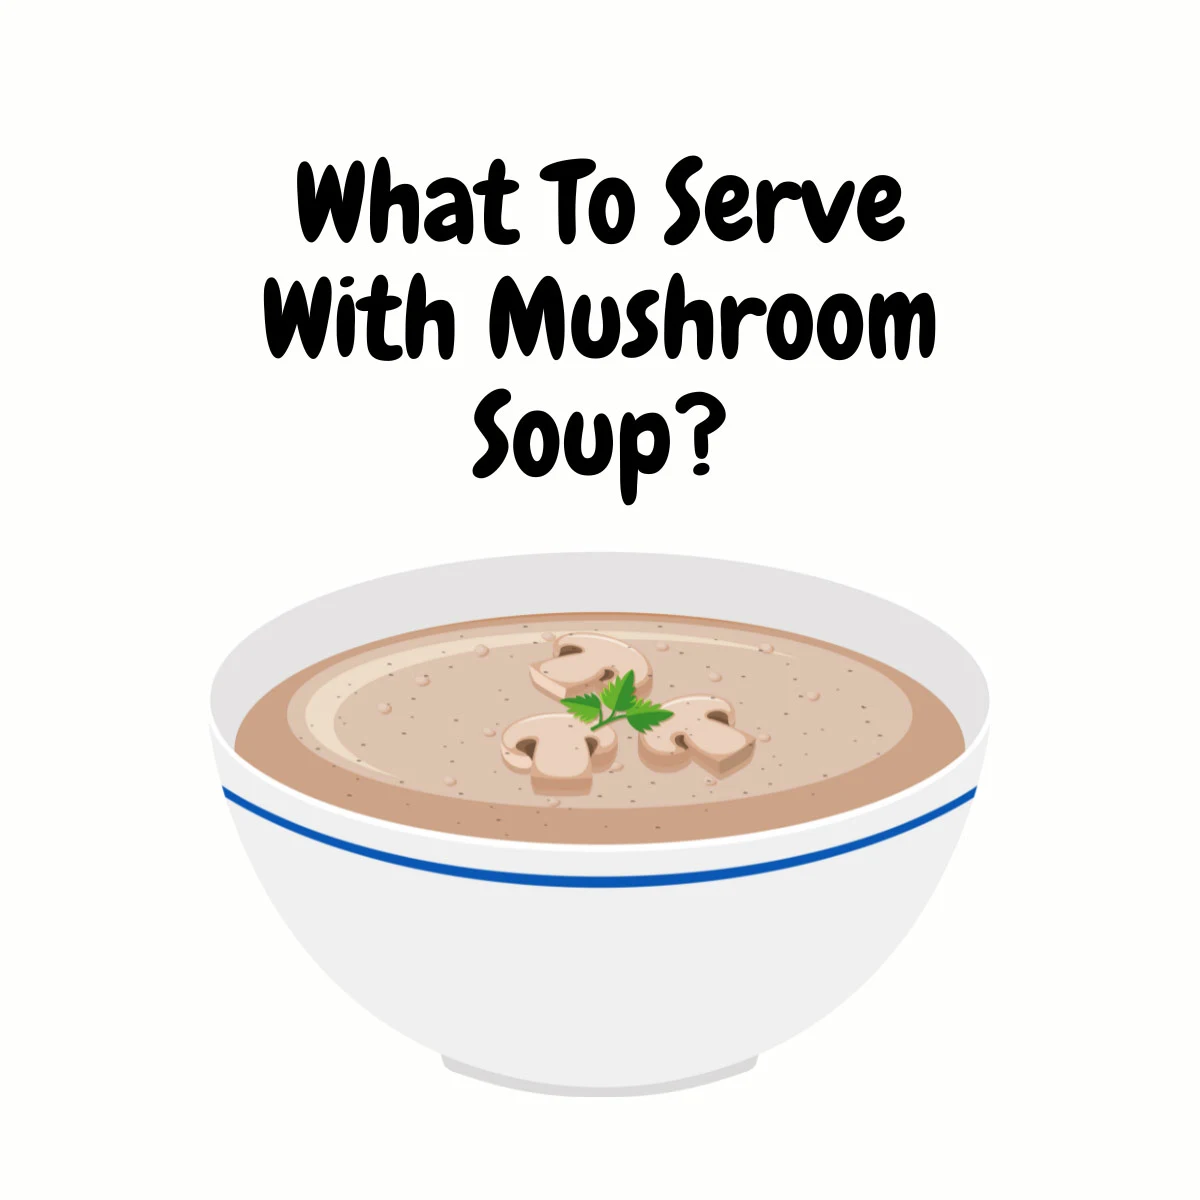 What To Serve With Mushroom Soup featured image | Girl Meets Food